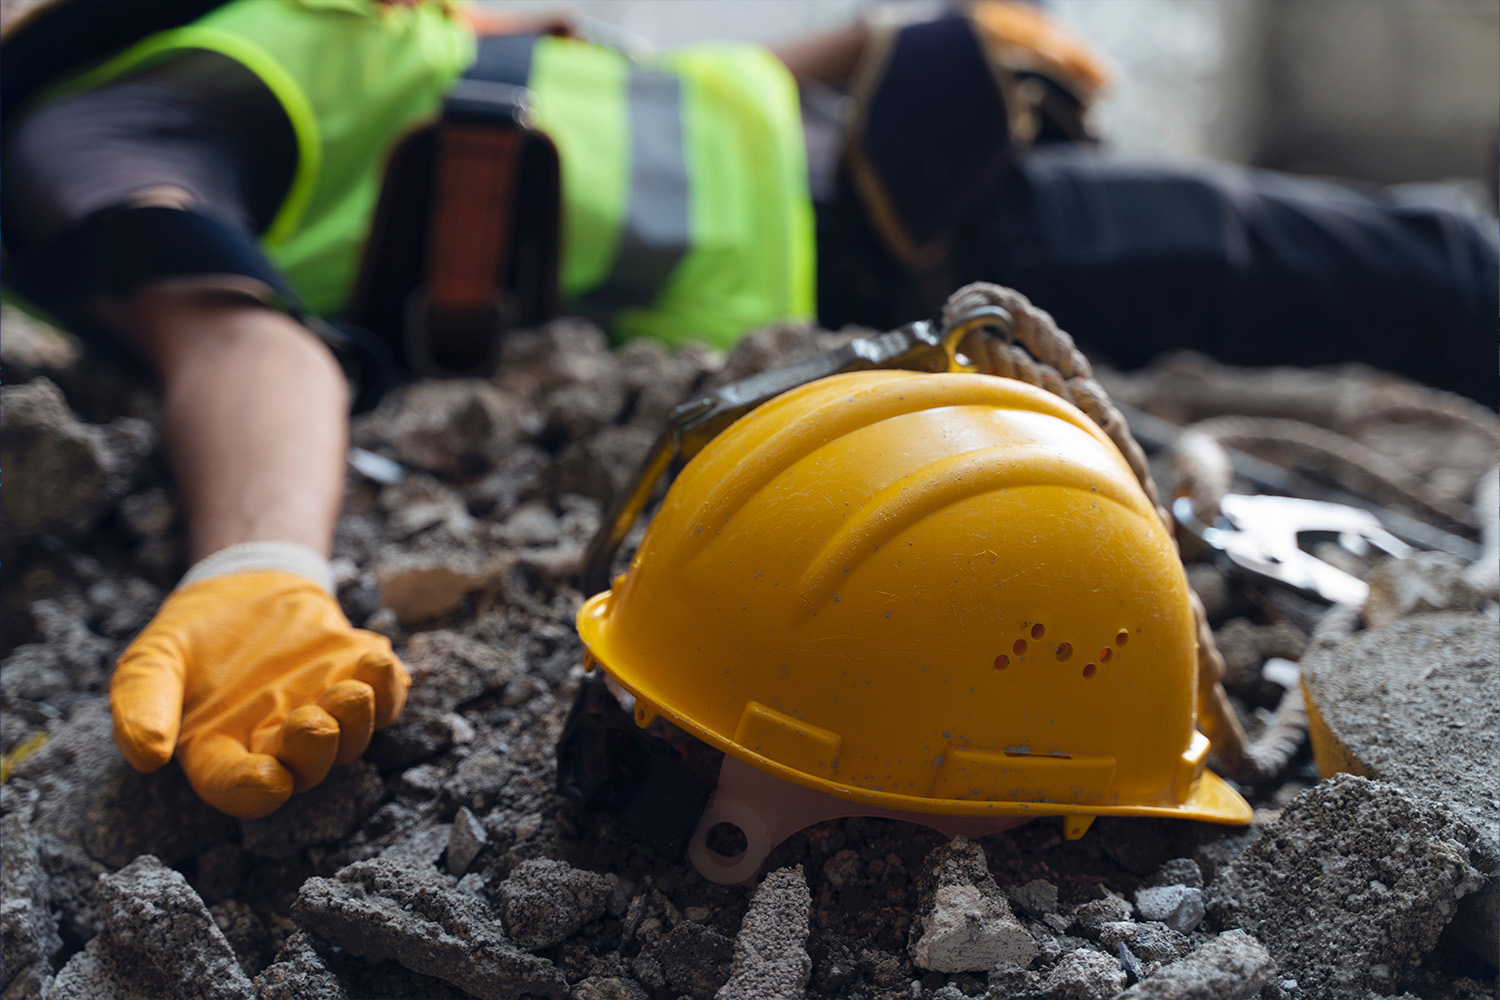 When Should I Get a Construction Accident Lawyer?